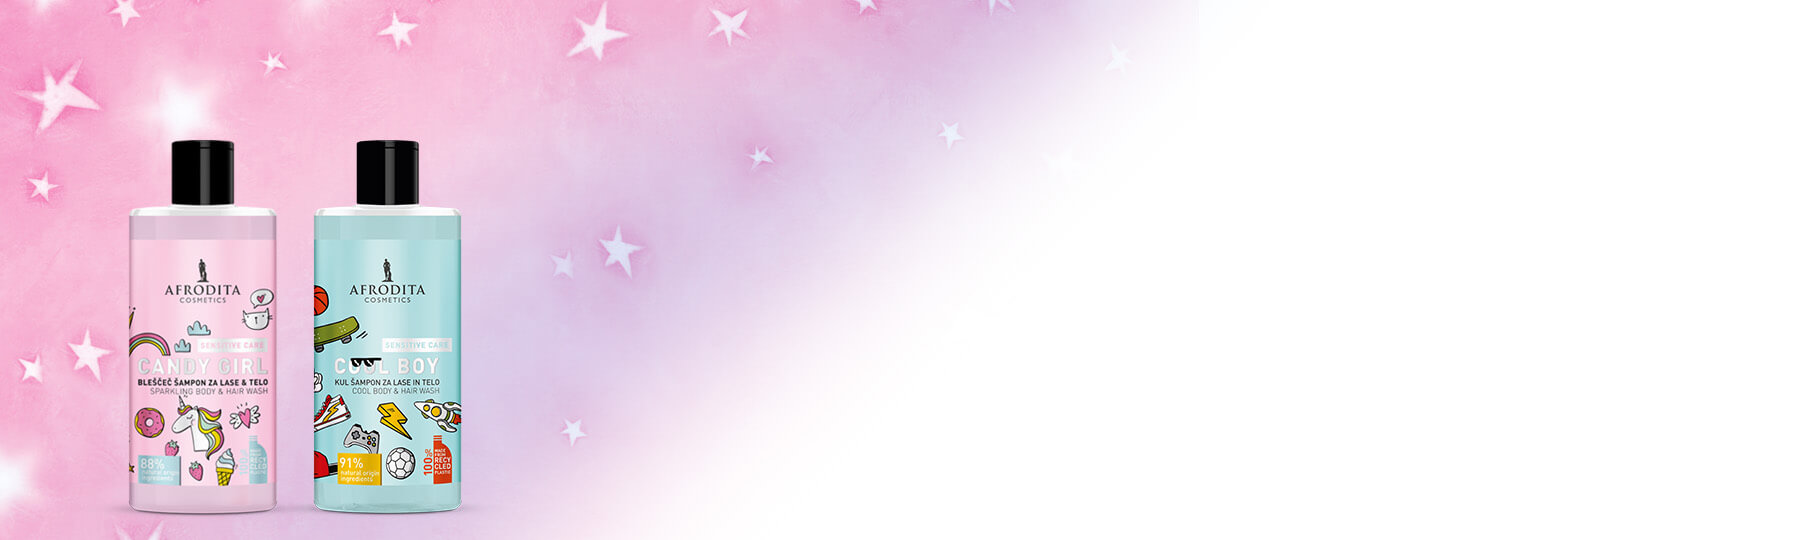 candy_cool-1800x540